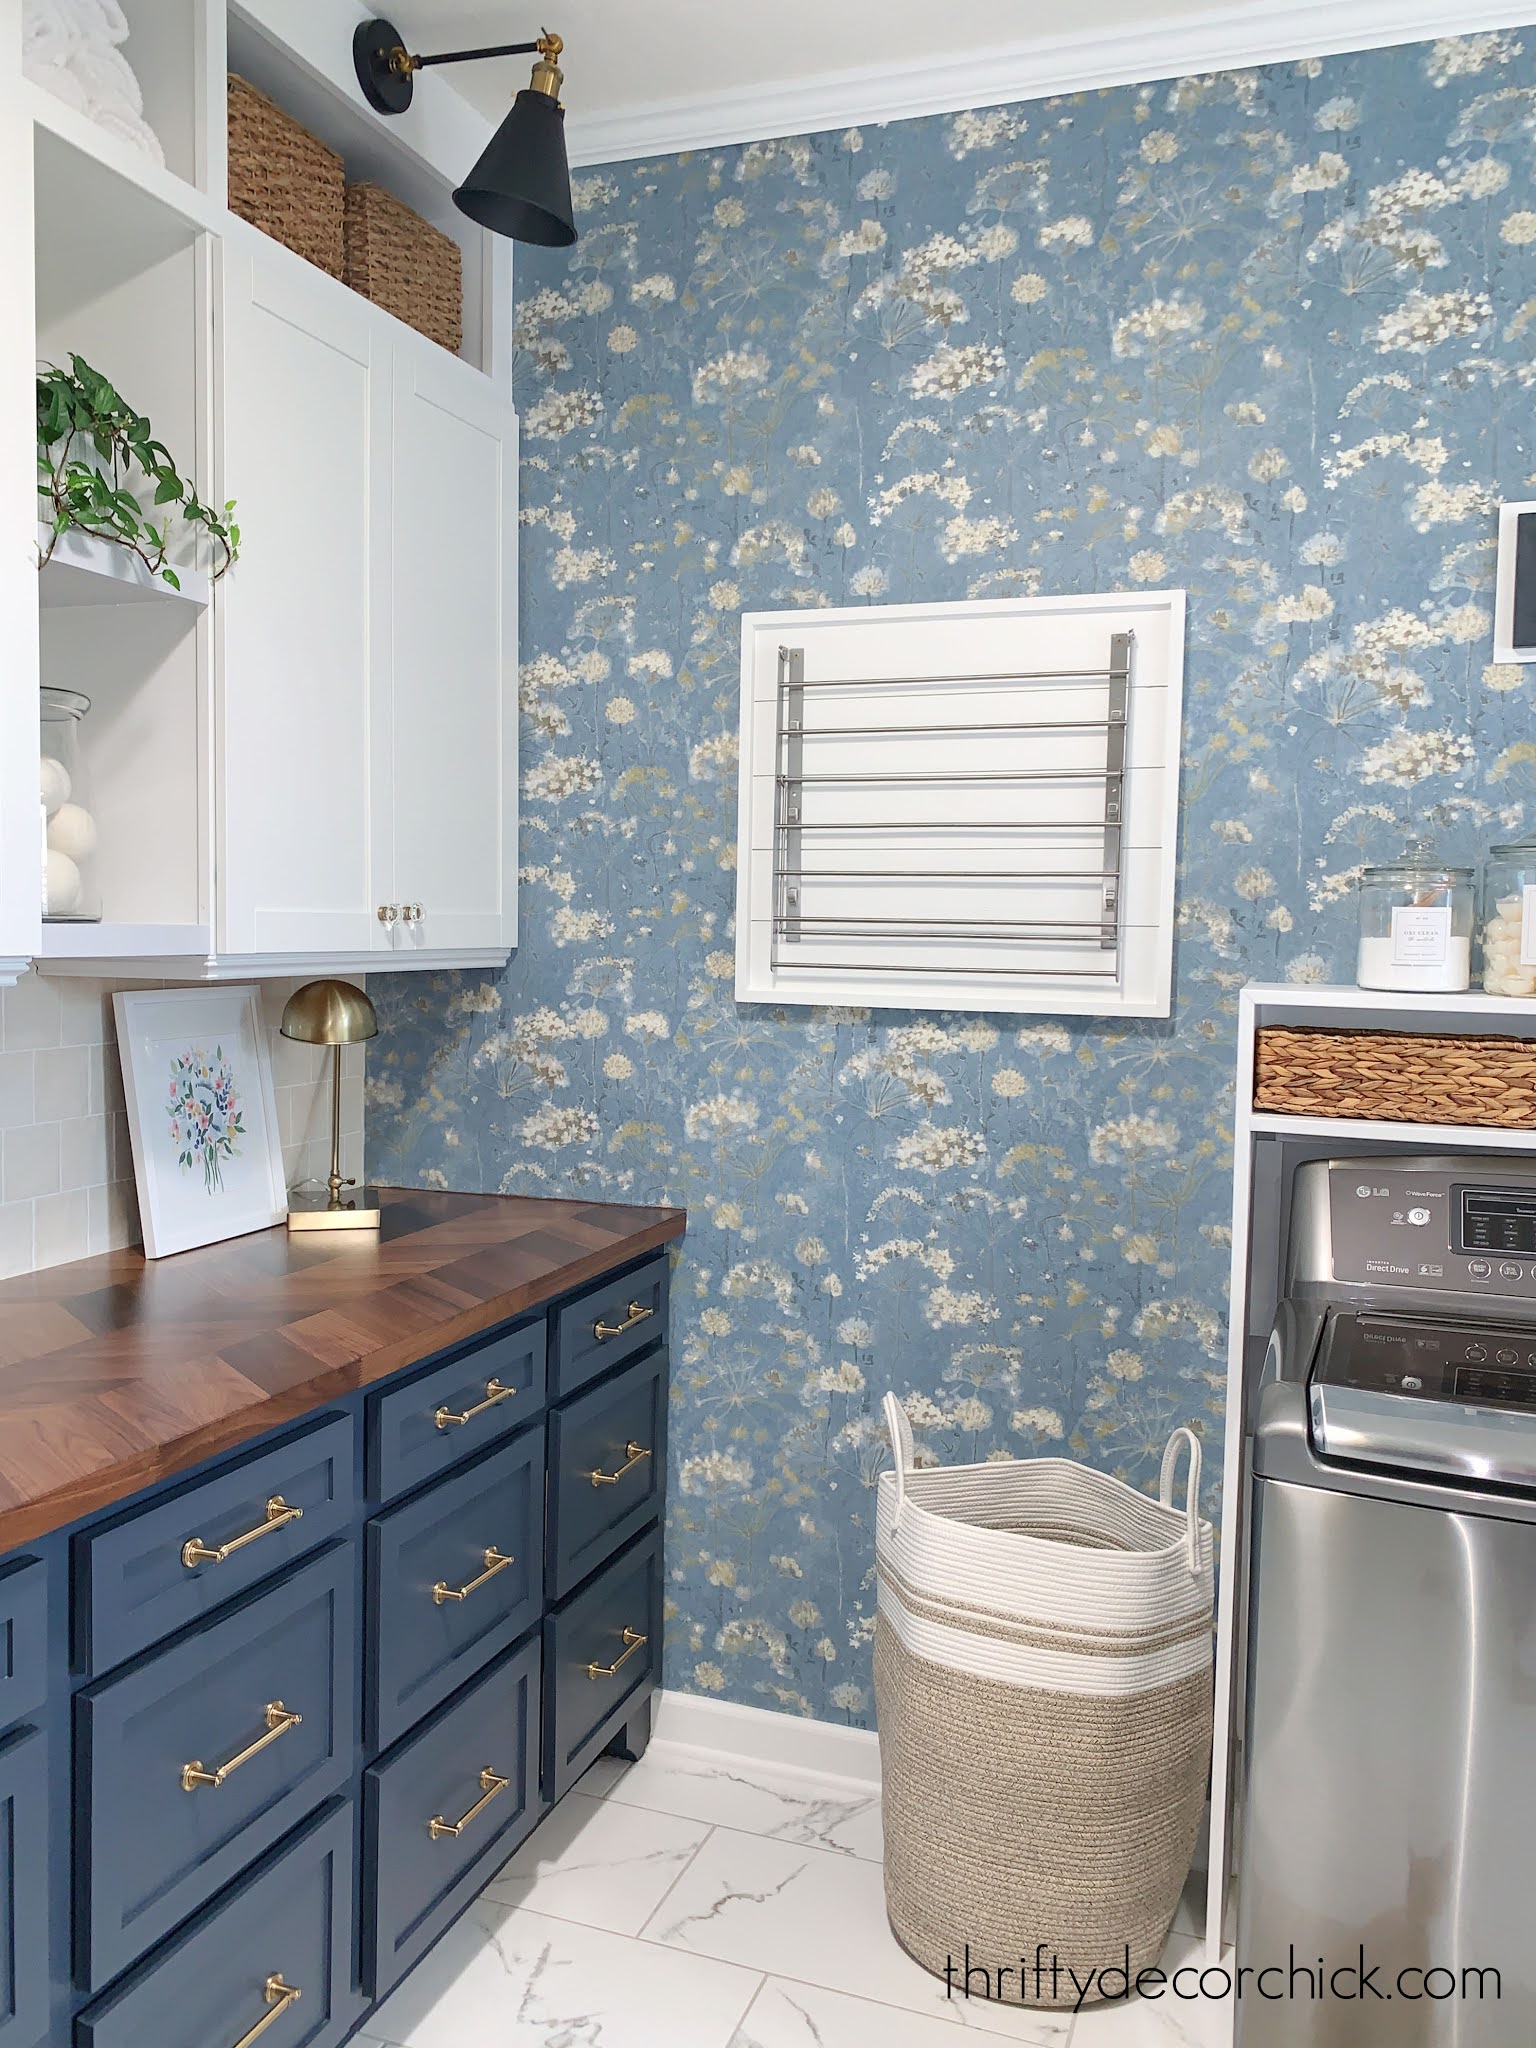 The Perfect Laundry/Mud Room Cleaning Closet, Thrifty Decor Chick